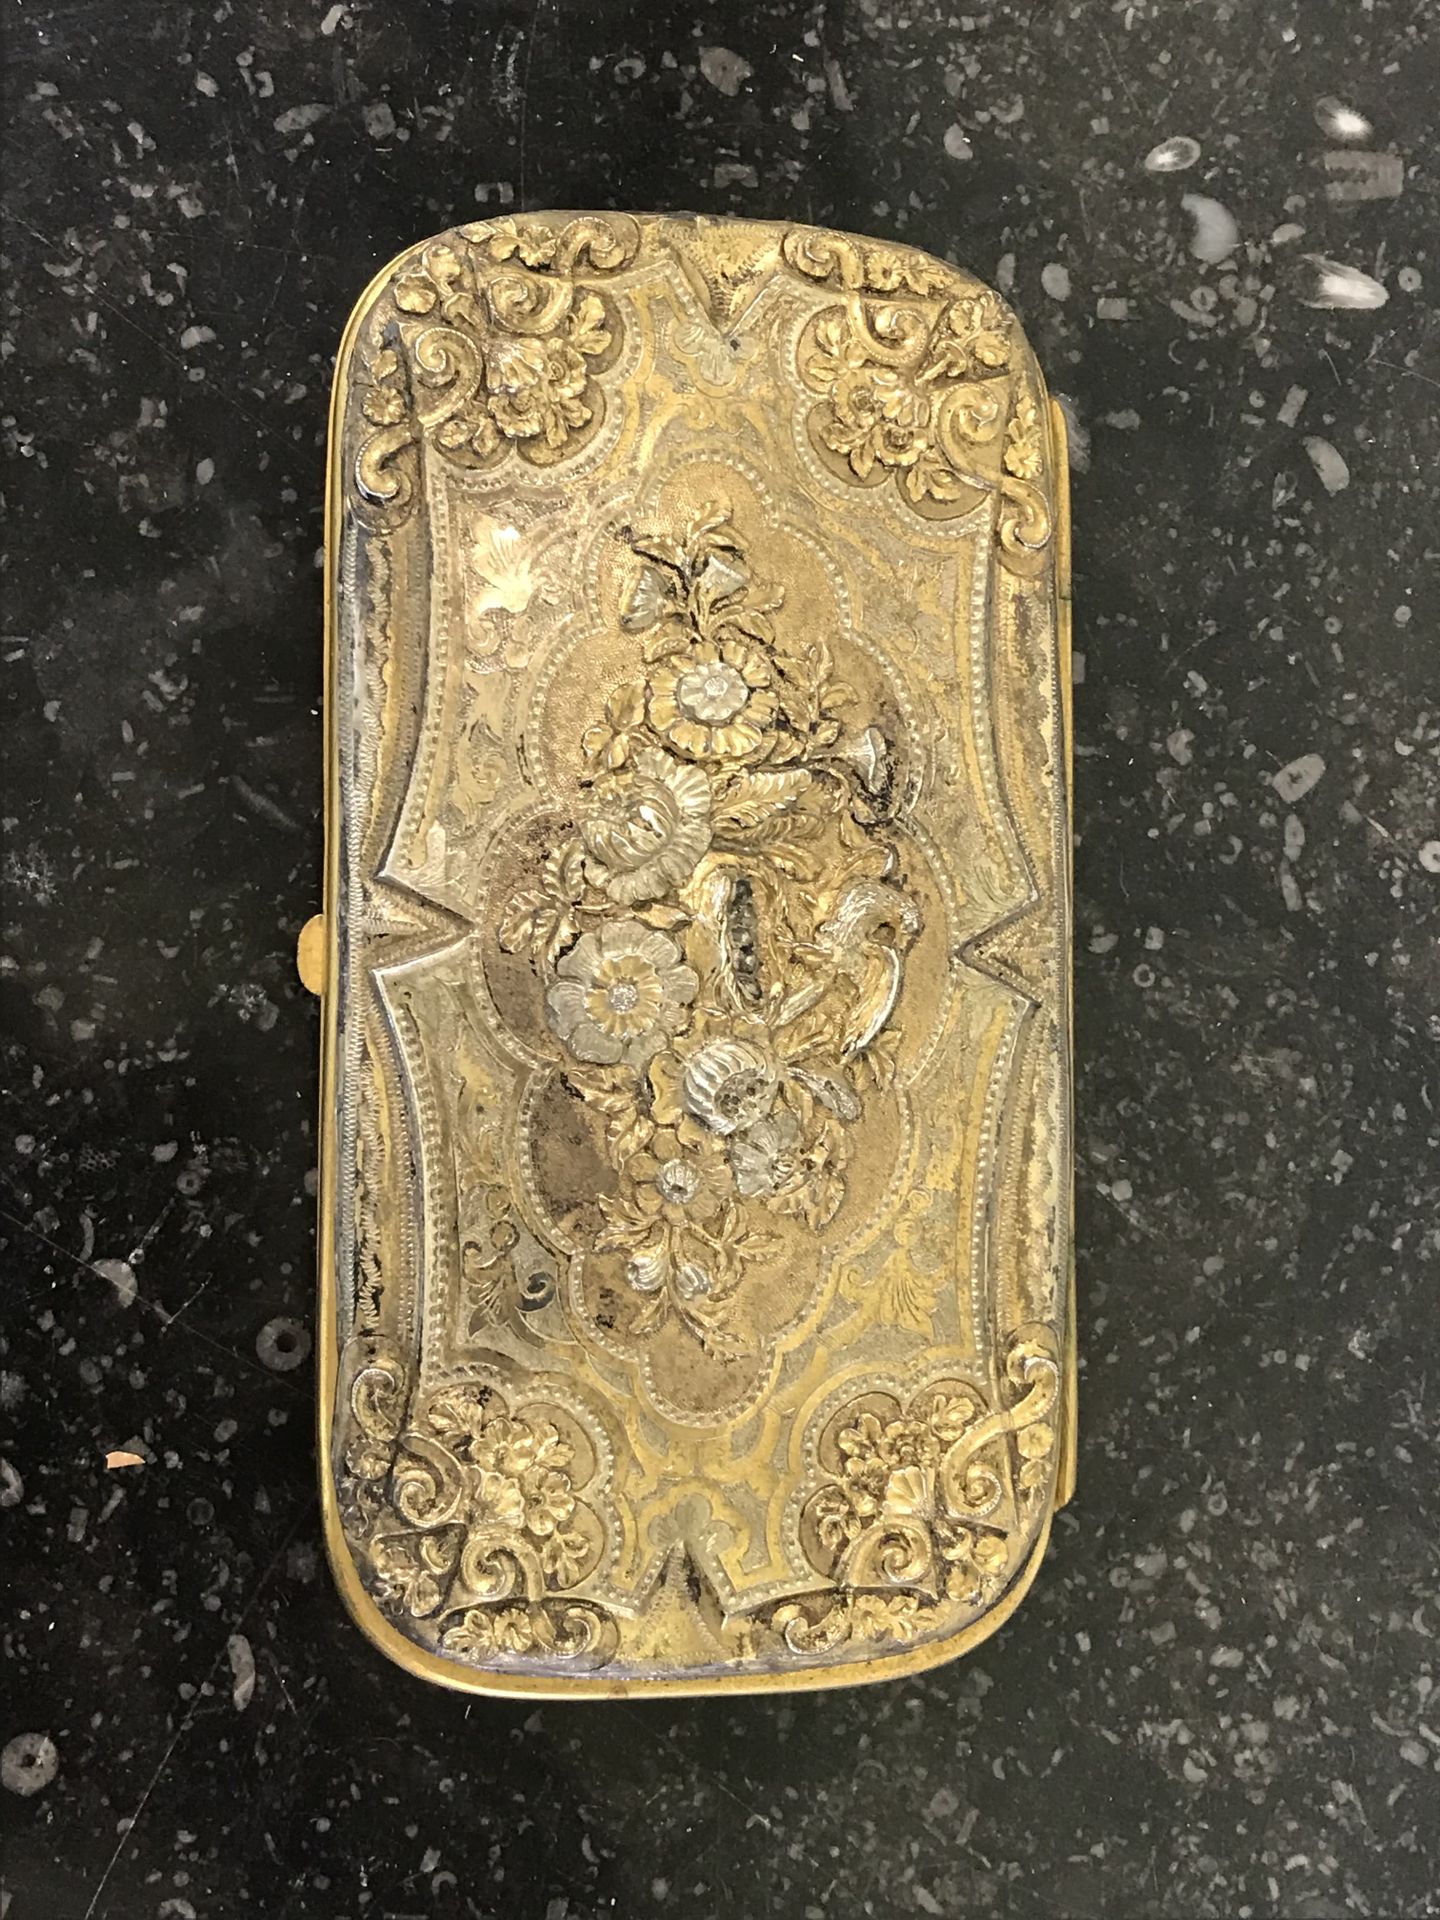 Null Chased and embossed metal case with floral and eagle decoration

Accidents,&hellip;